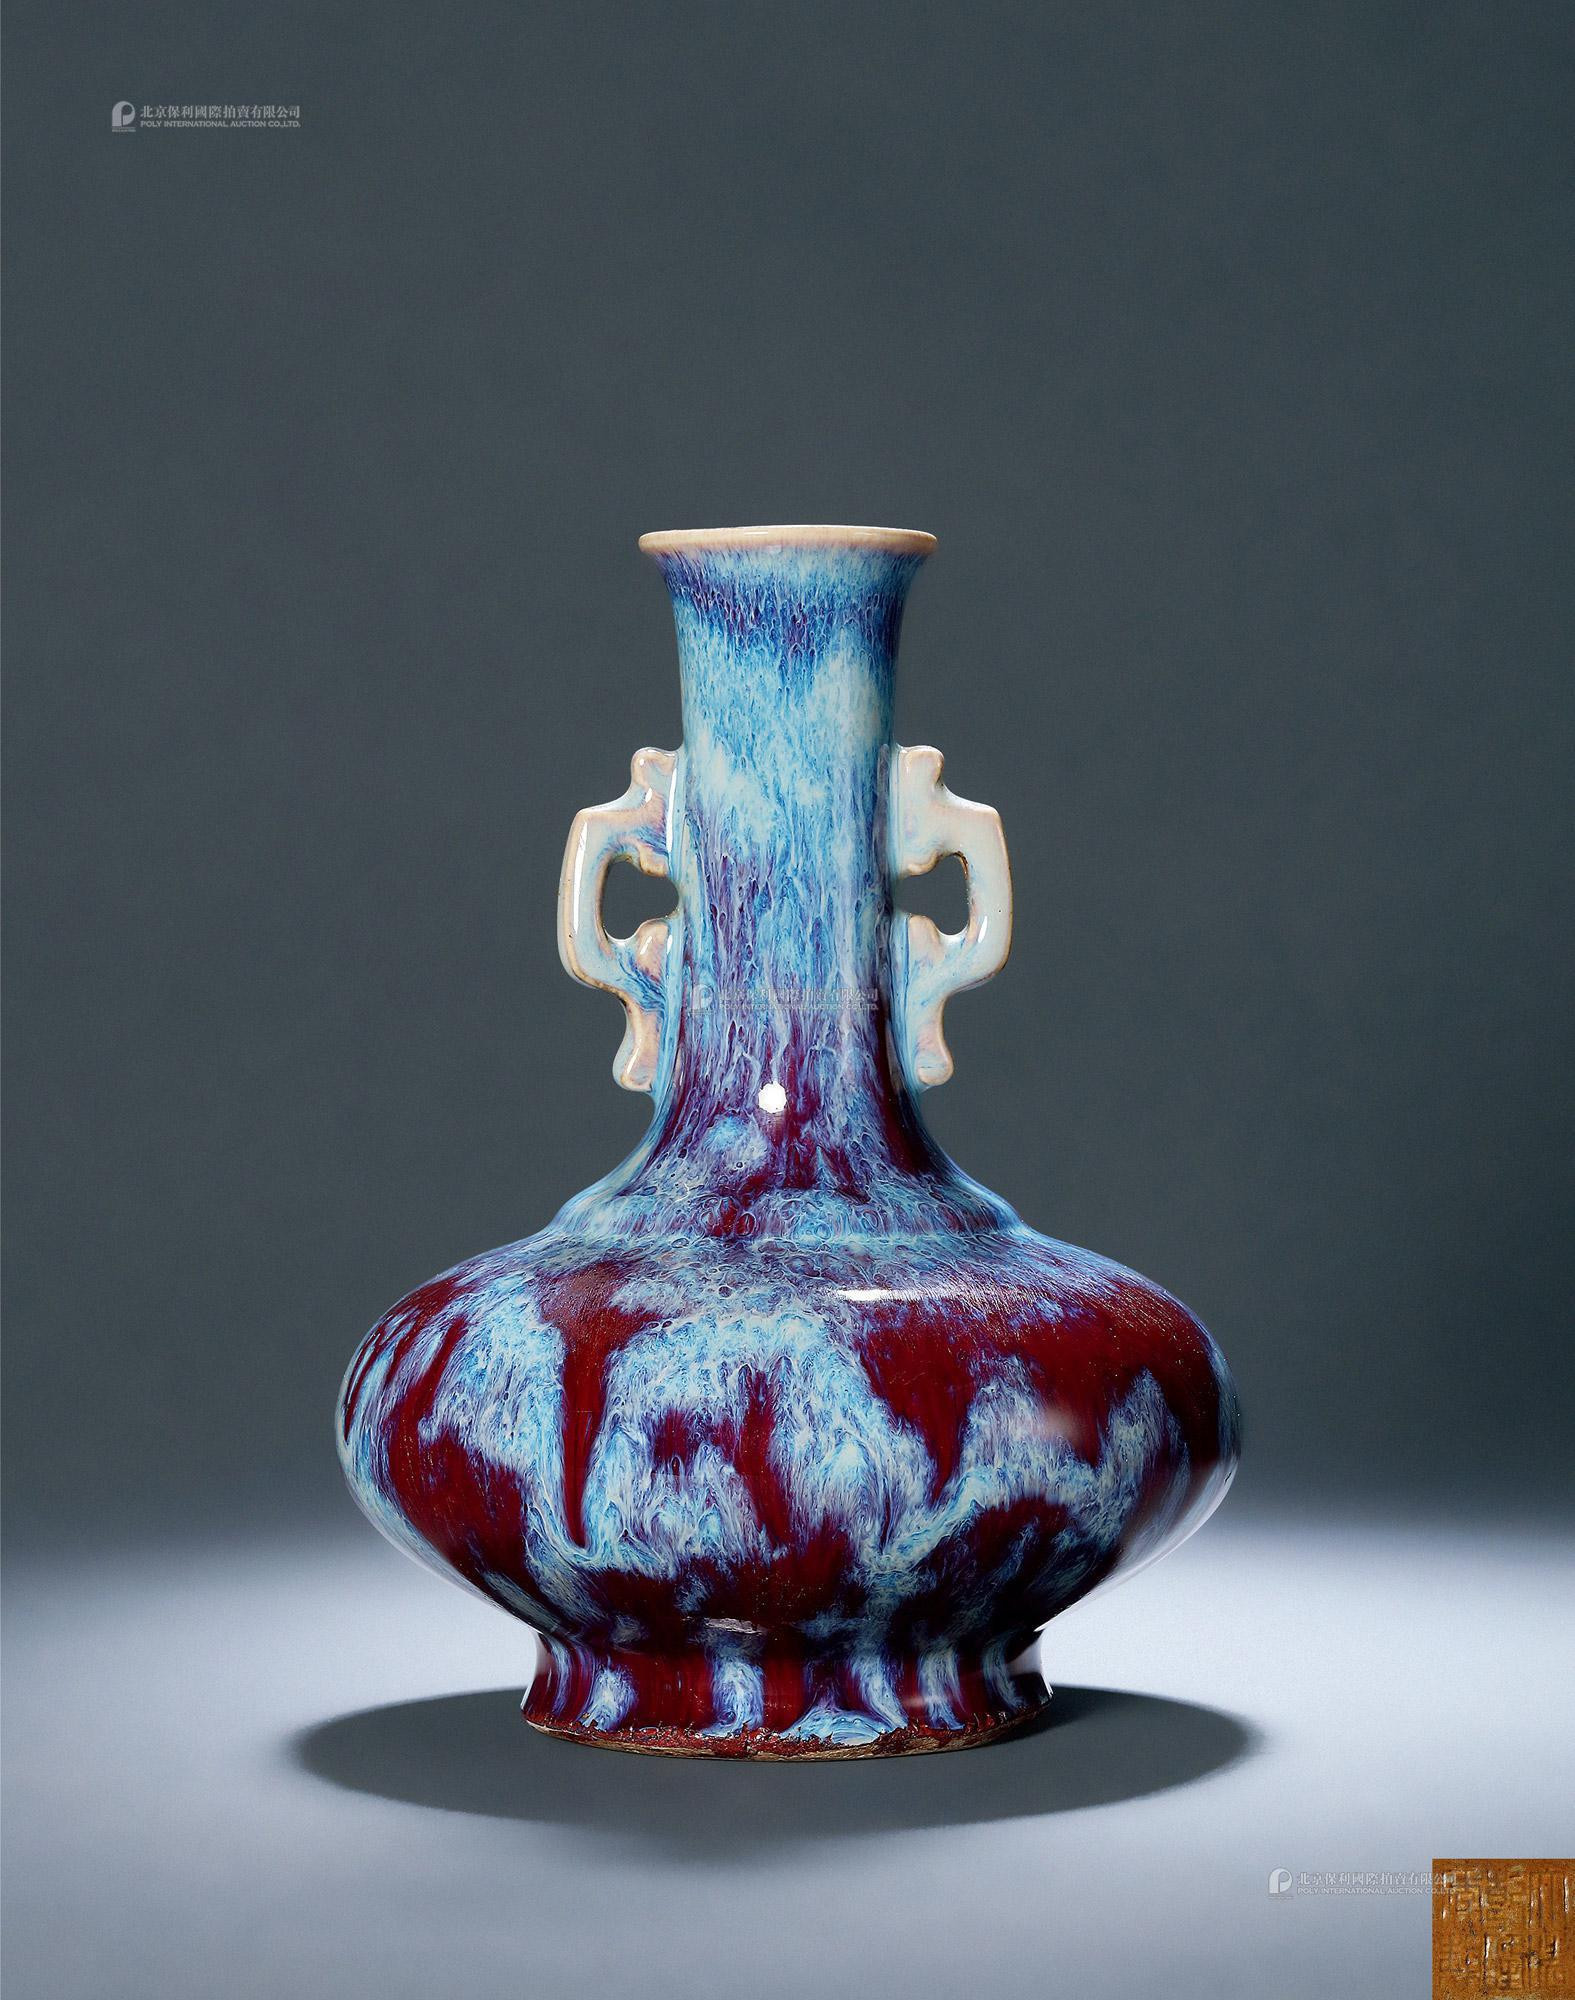 A FLAMBE GLAZED VASE WITH HANDLES DESIGN